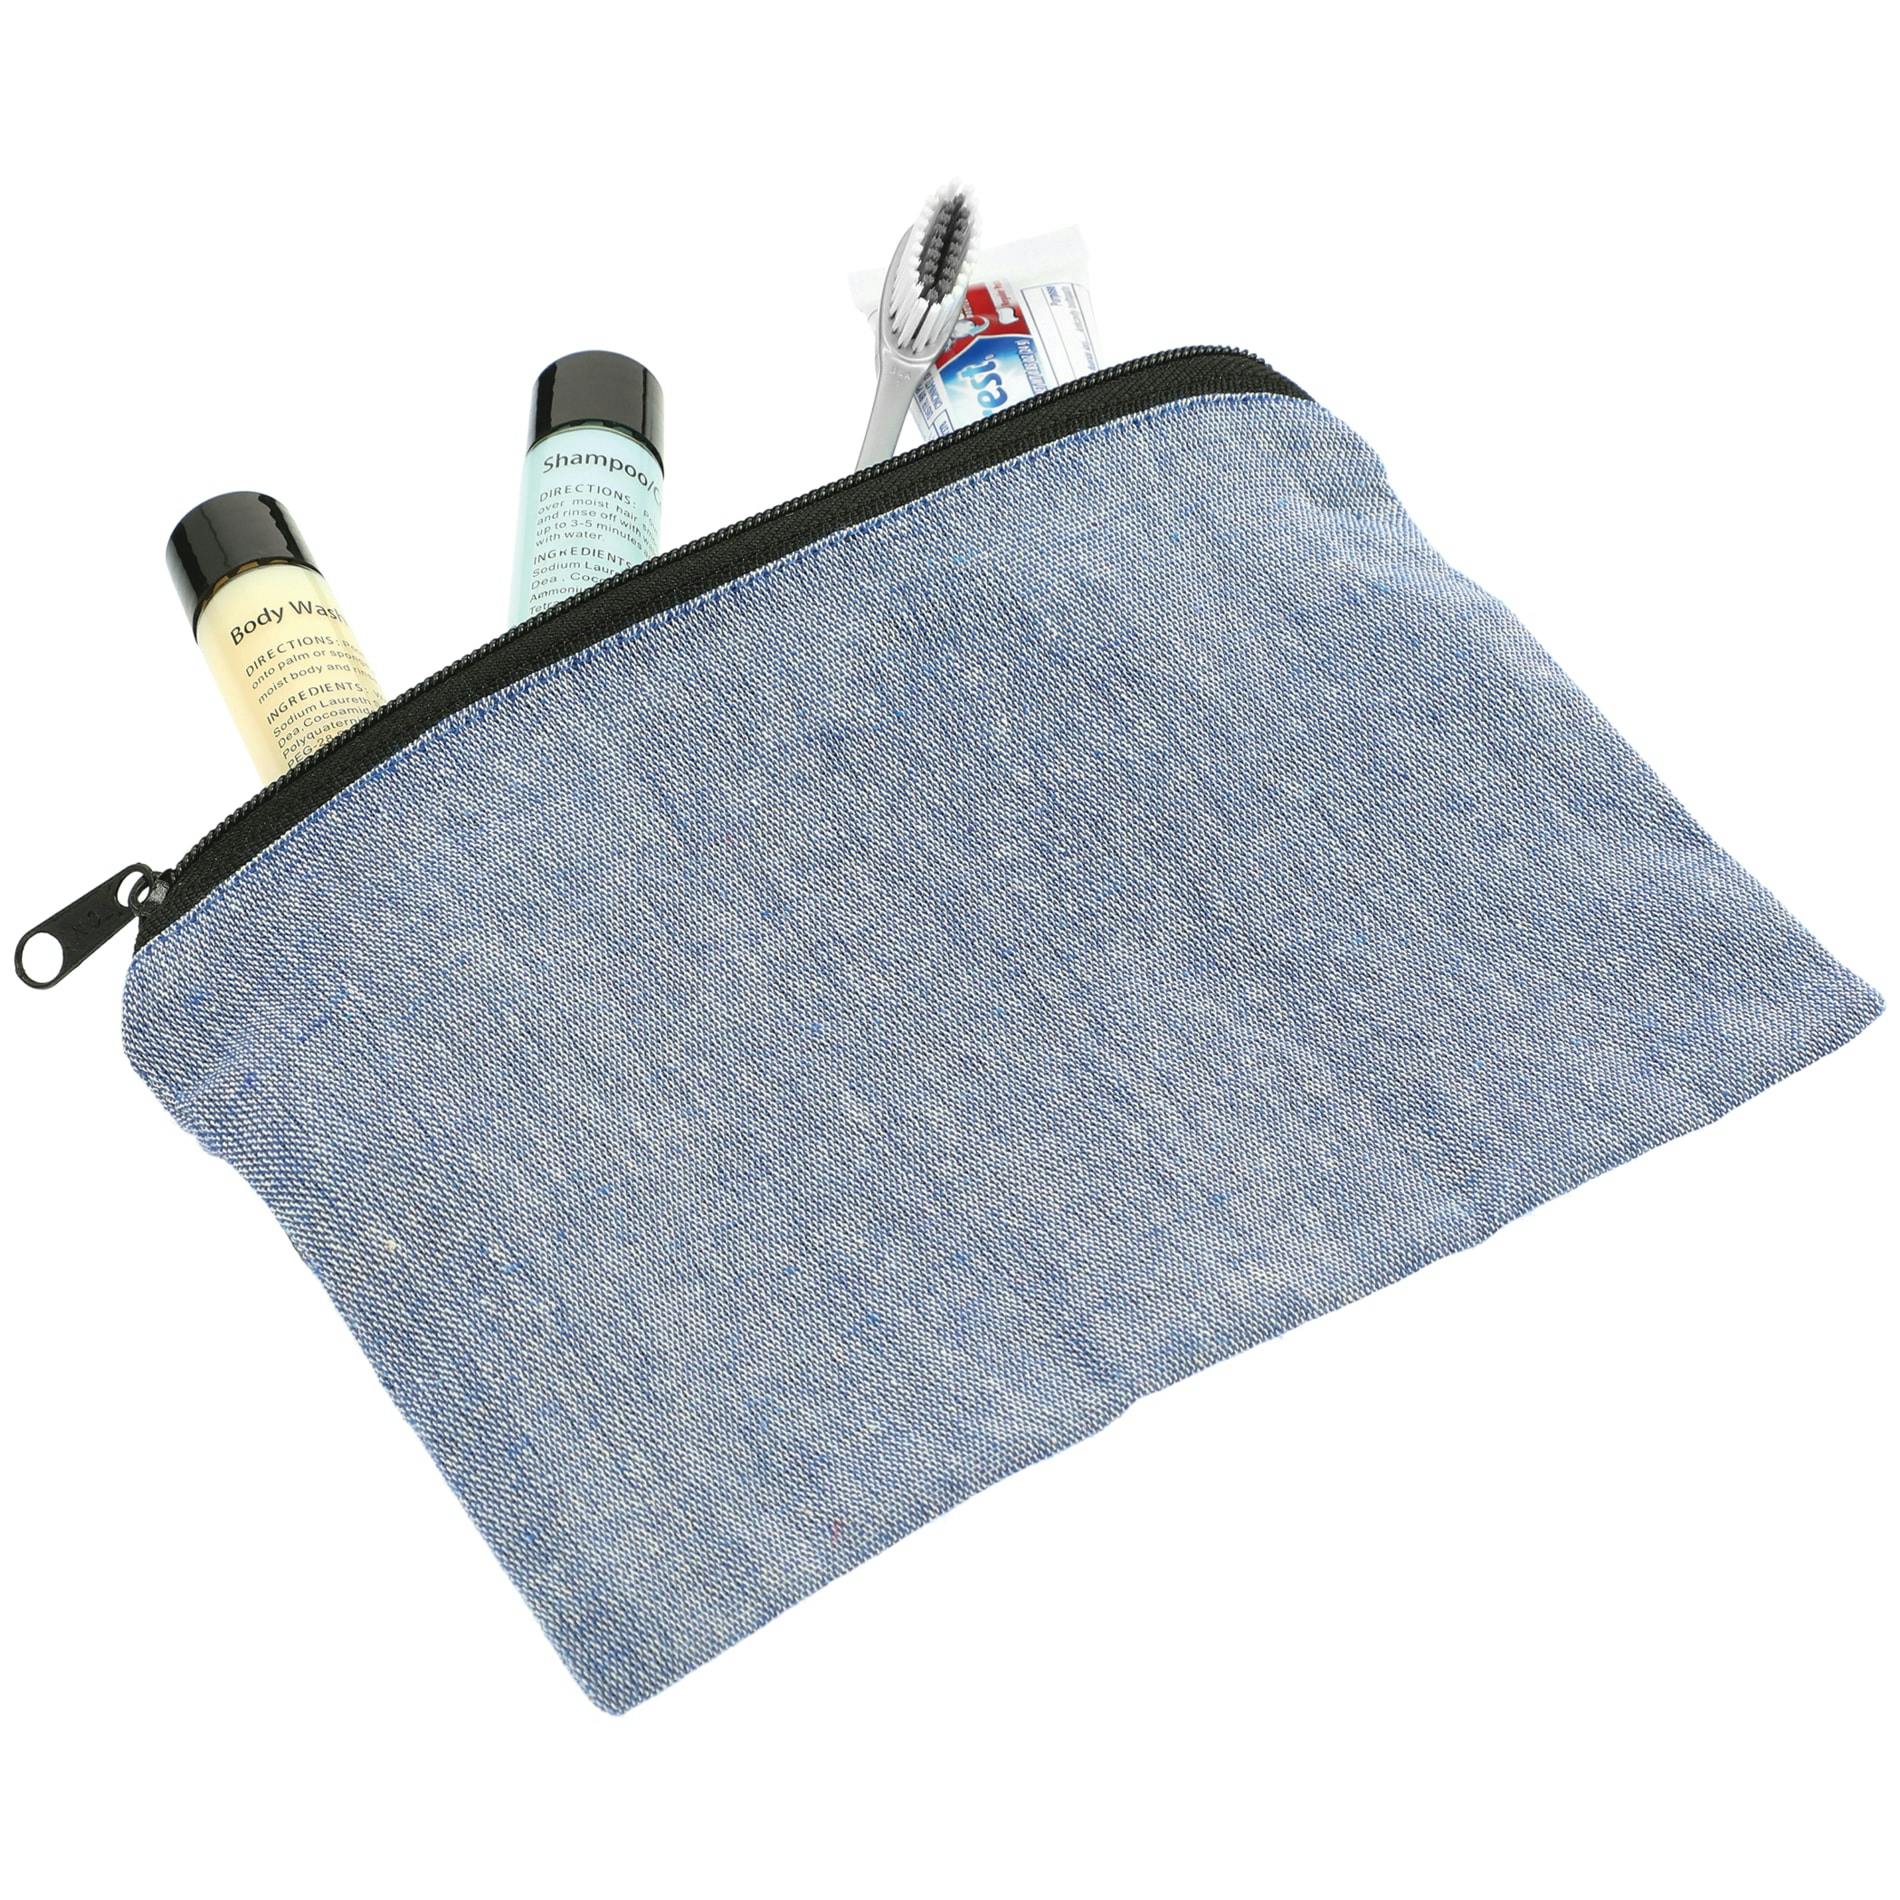 Recycled 5oz Cotton Twill Pouch - additional Image 1